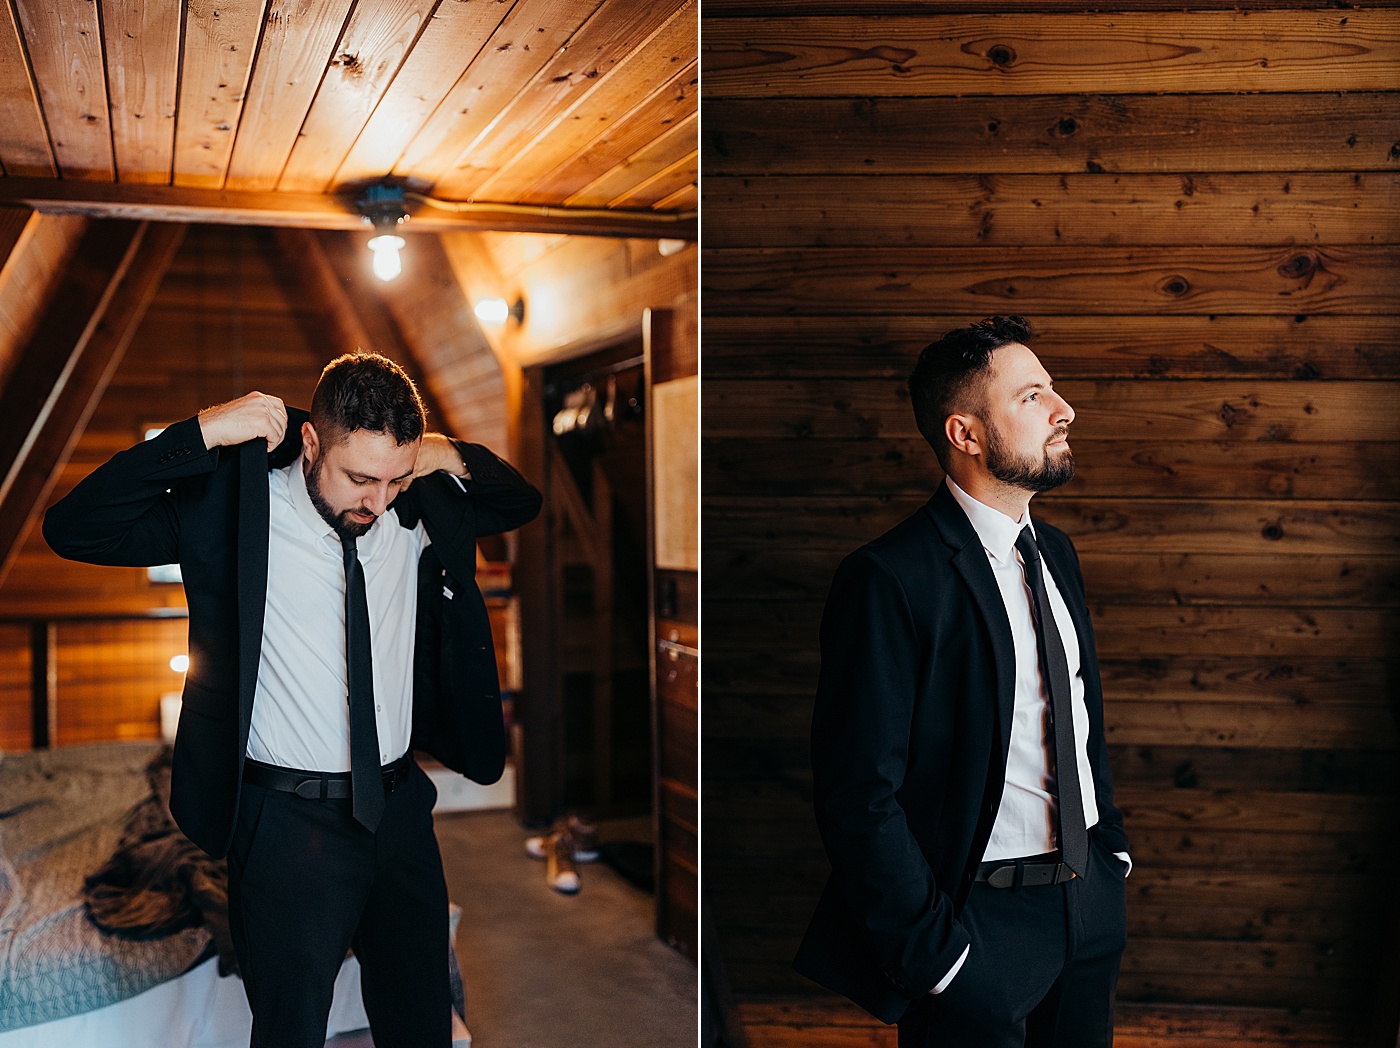 Groom getting ready for elopement | Photo by Megan Montalvo Photography